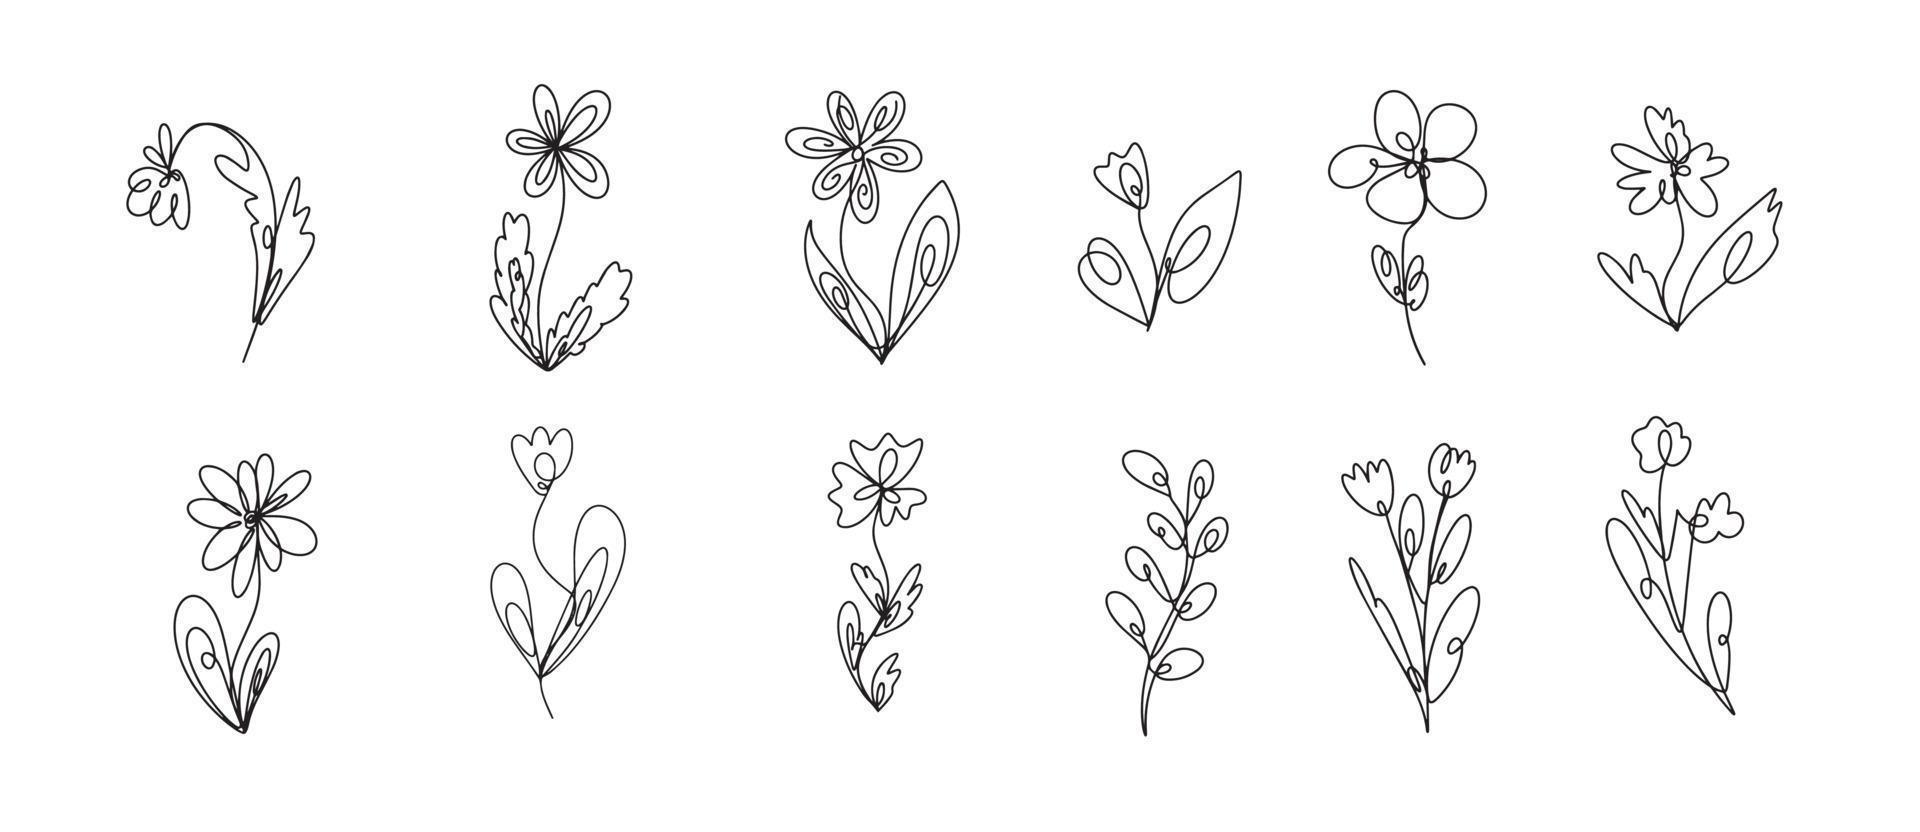 Continuous line drawing plants black sketch wild flowers isolated on white background flowers one line illustration minimalist print set vector